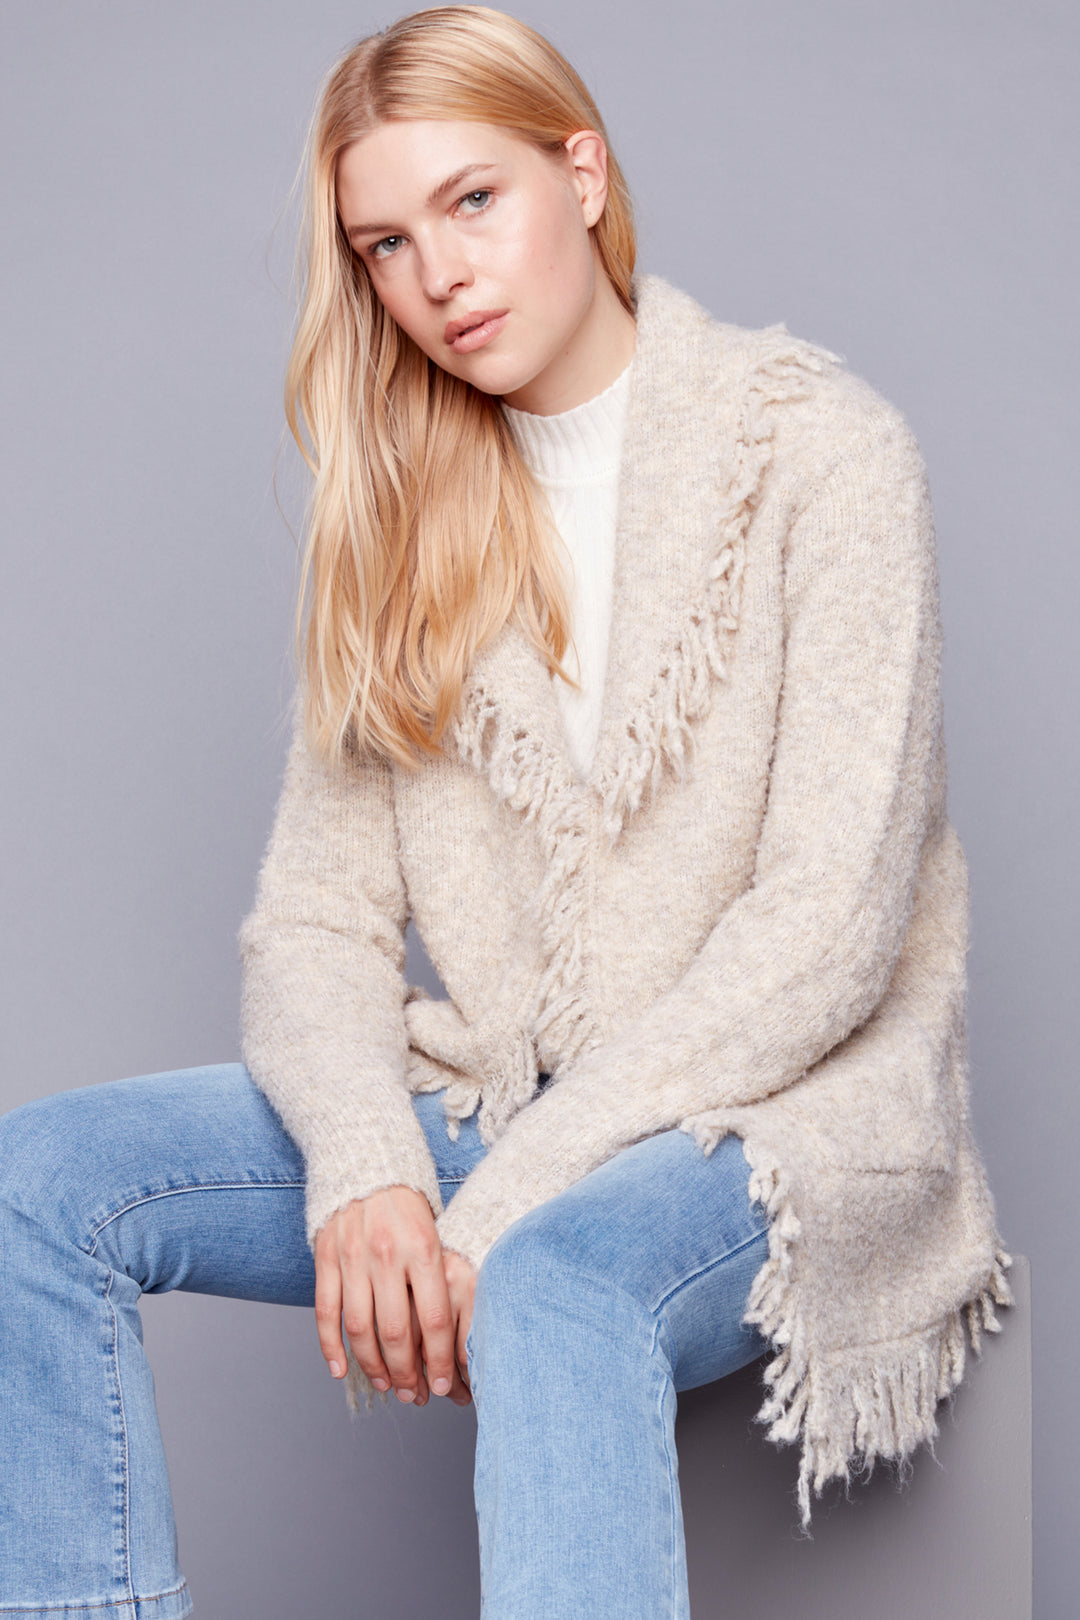 This new shawl-neck boucle knit cardigan features fluffy fringed edges and patch pockets. The light-weight construction and unique style provide a modern take on a classic design, while the soft fall tones make it perfect for autum season. 